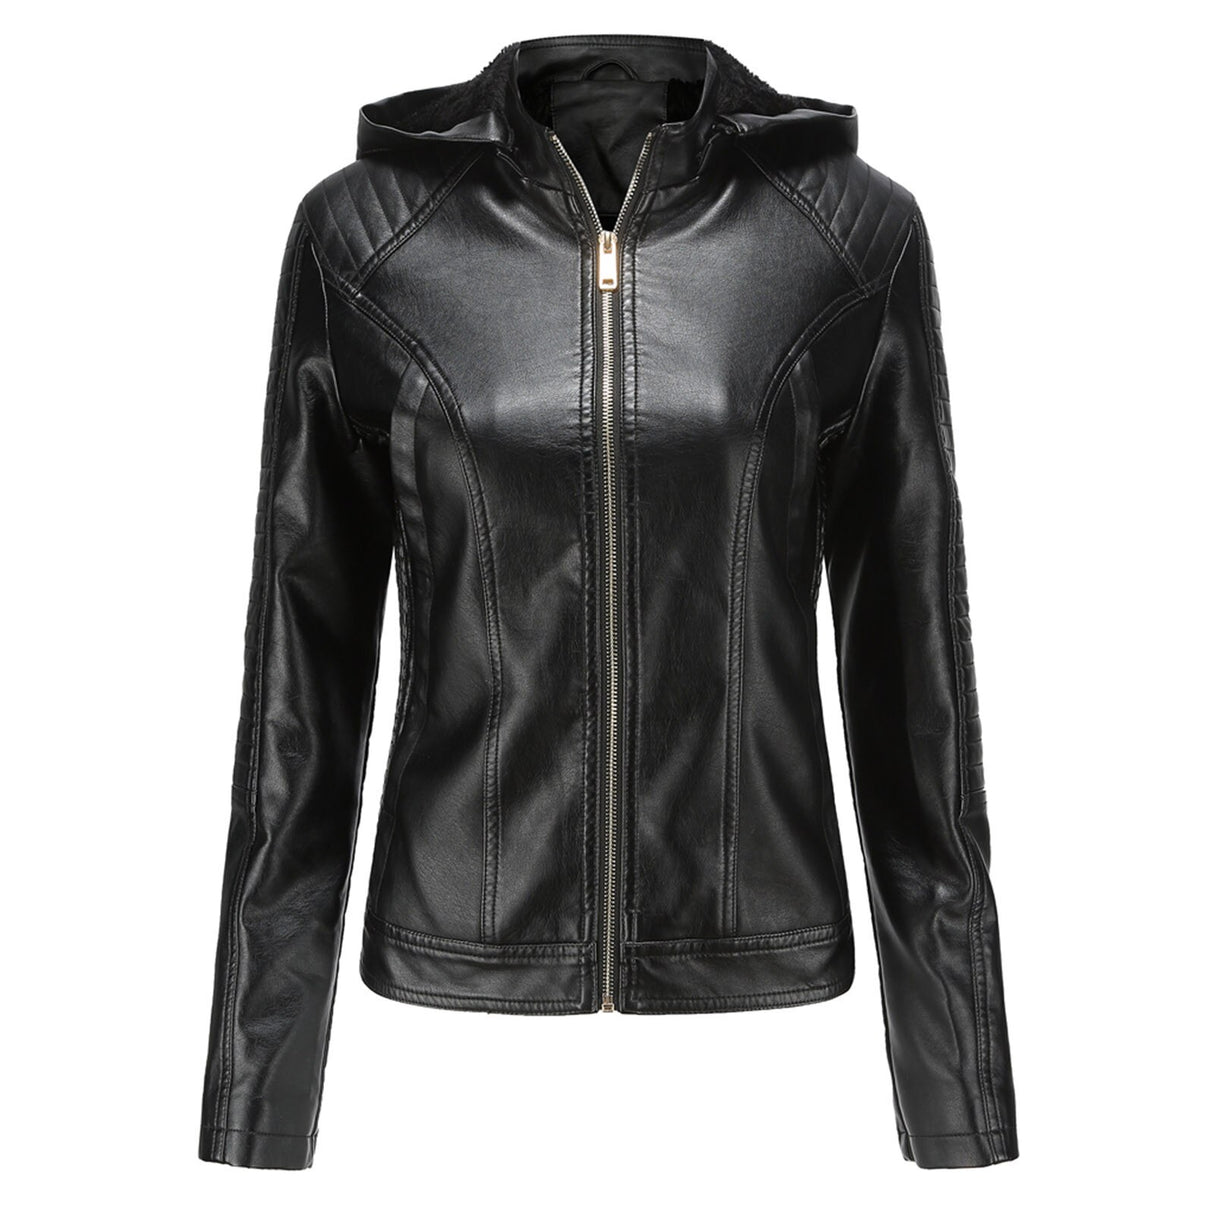 Women's Biker Leather Jacket with Removable Hood – Riders Gear Store